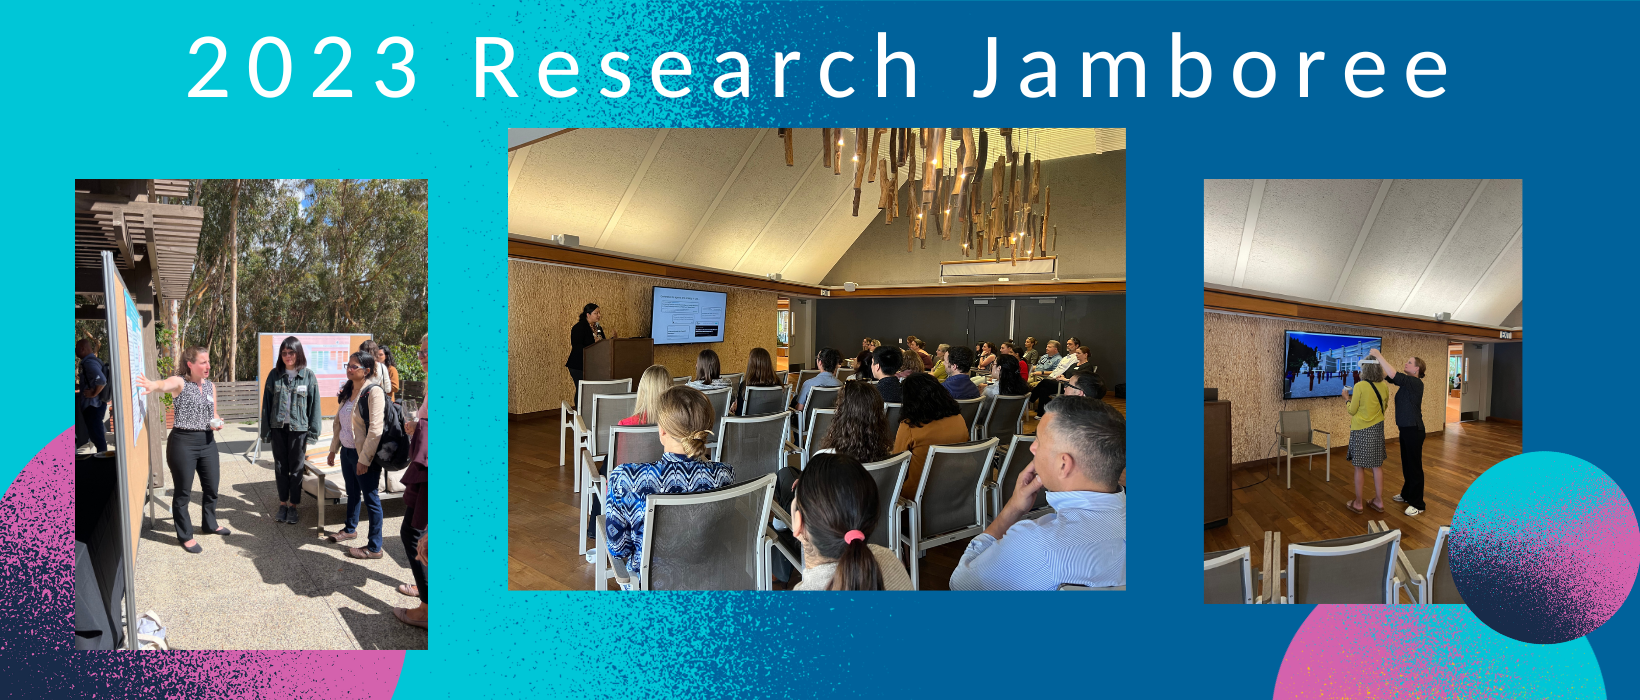 3 of 7, Three images of various aspects of the TECH Center Research Jamboree: one the far left, 3 individual chatting around a poster presentation, in the center, a presenter giving a lightning talk to a room of individuals, and on the right, and 2 individuals testing a VR platform